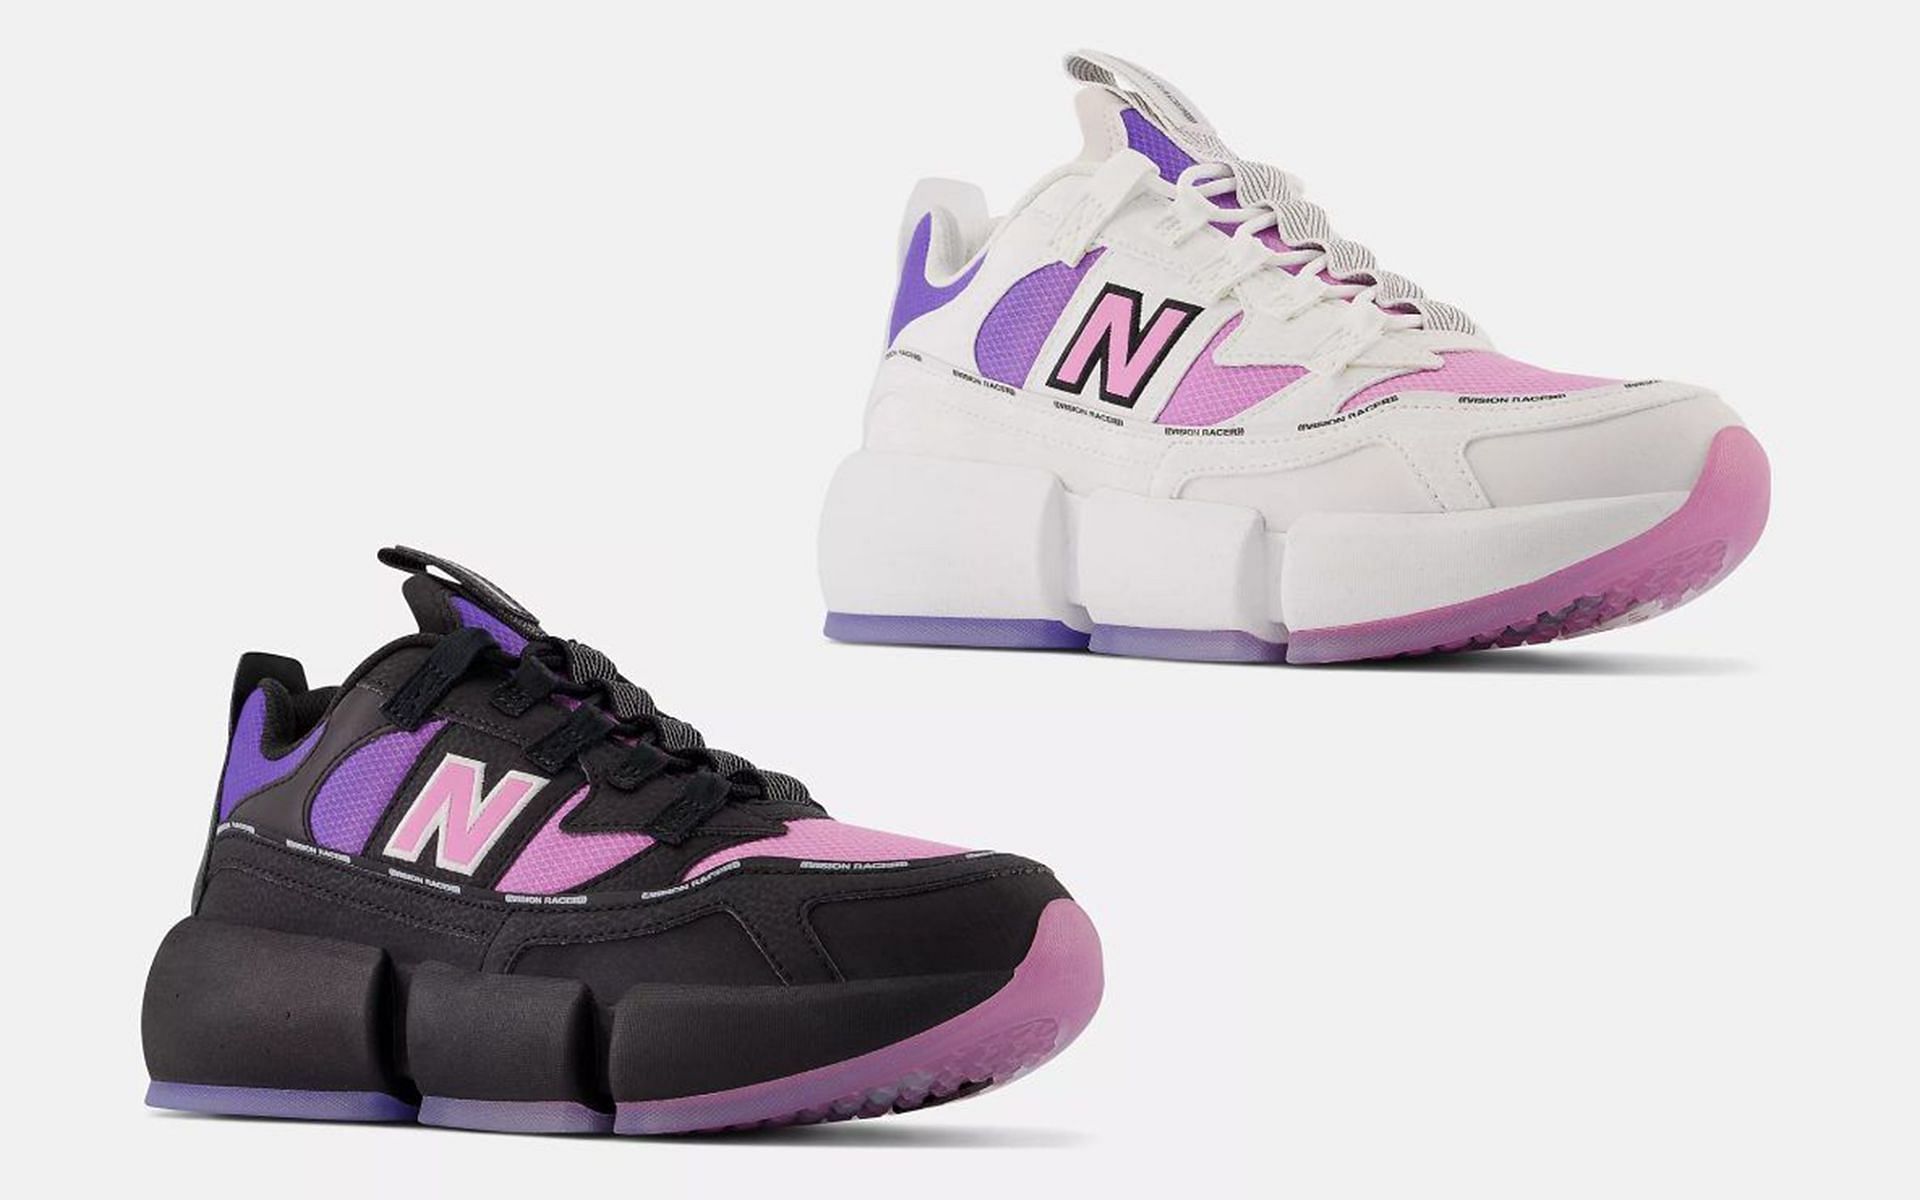 Jaden Smith x New Balance Sunset Chaser footwear collection (Image via NB)